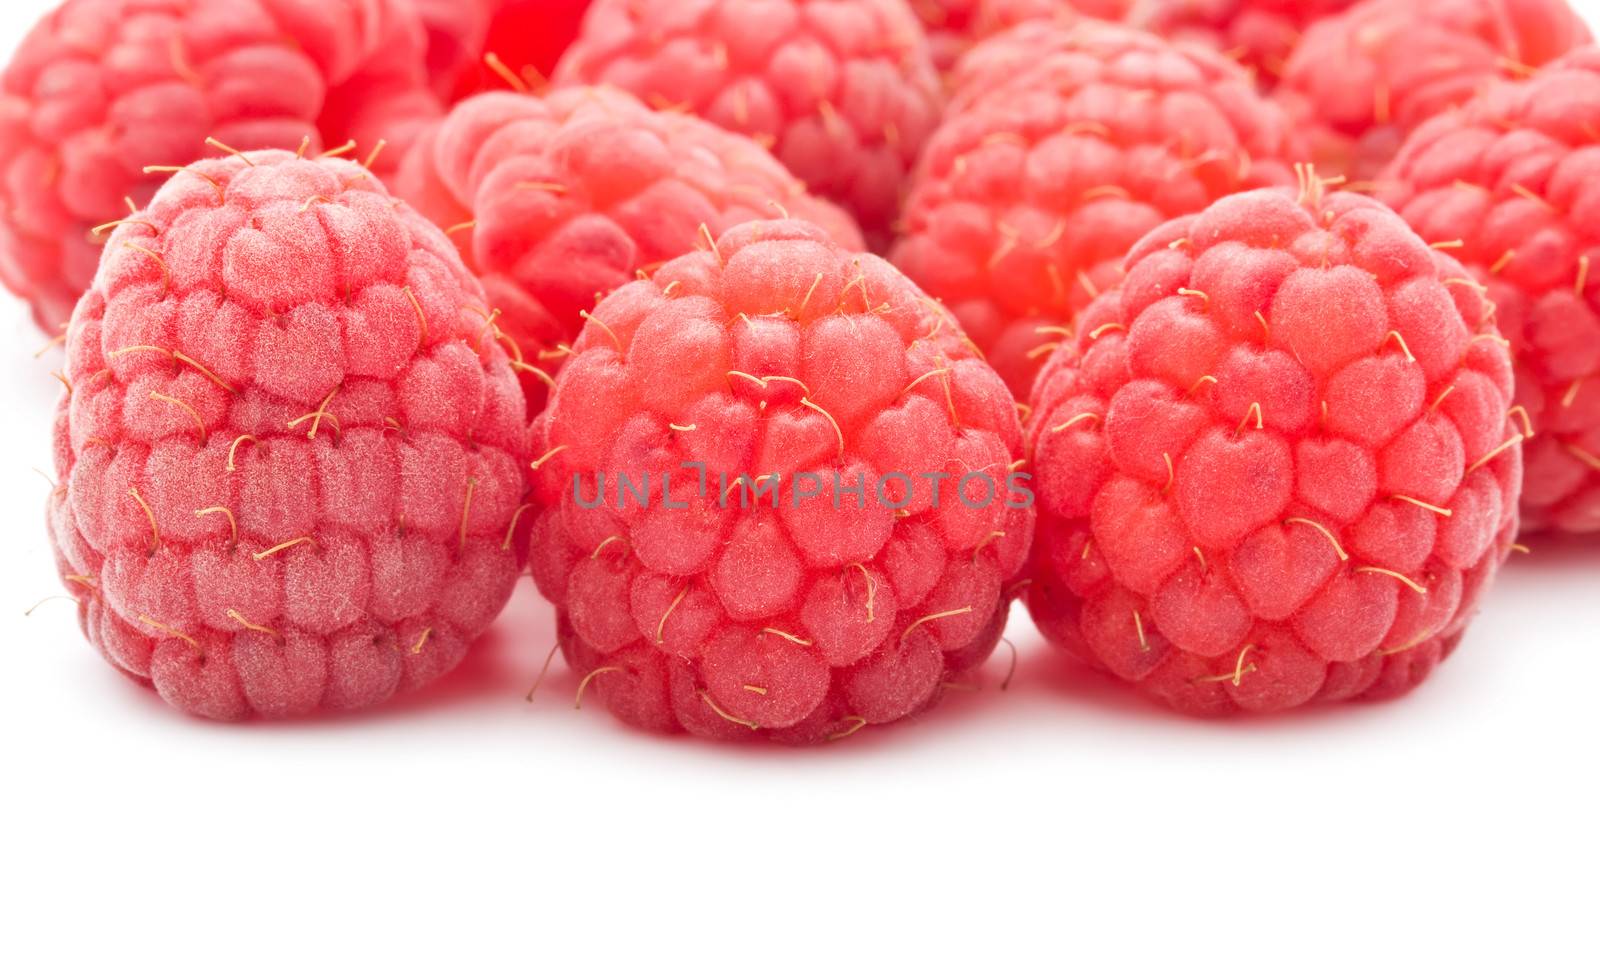 Ripe red raspberries isolated on white background